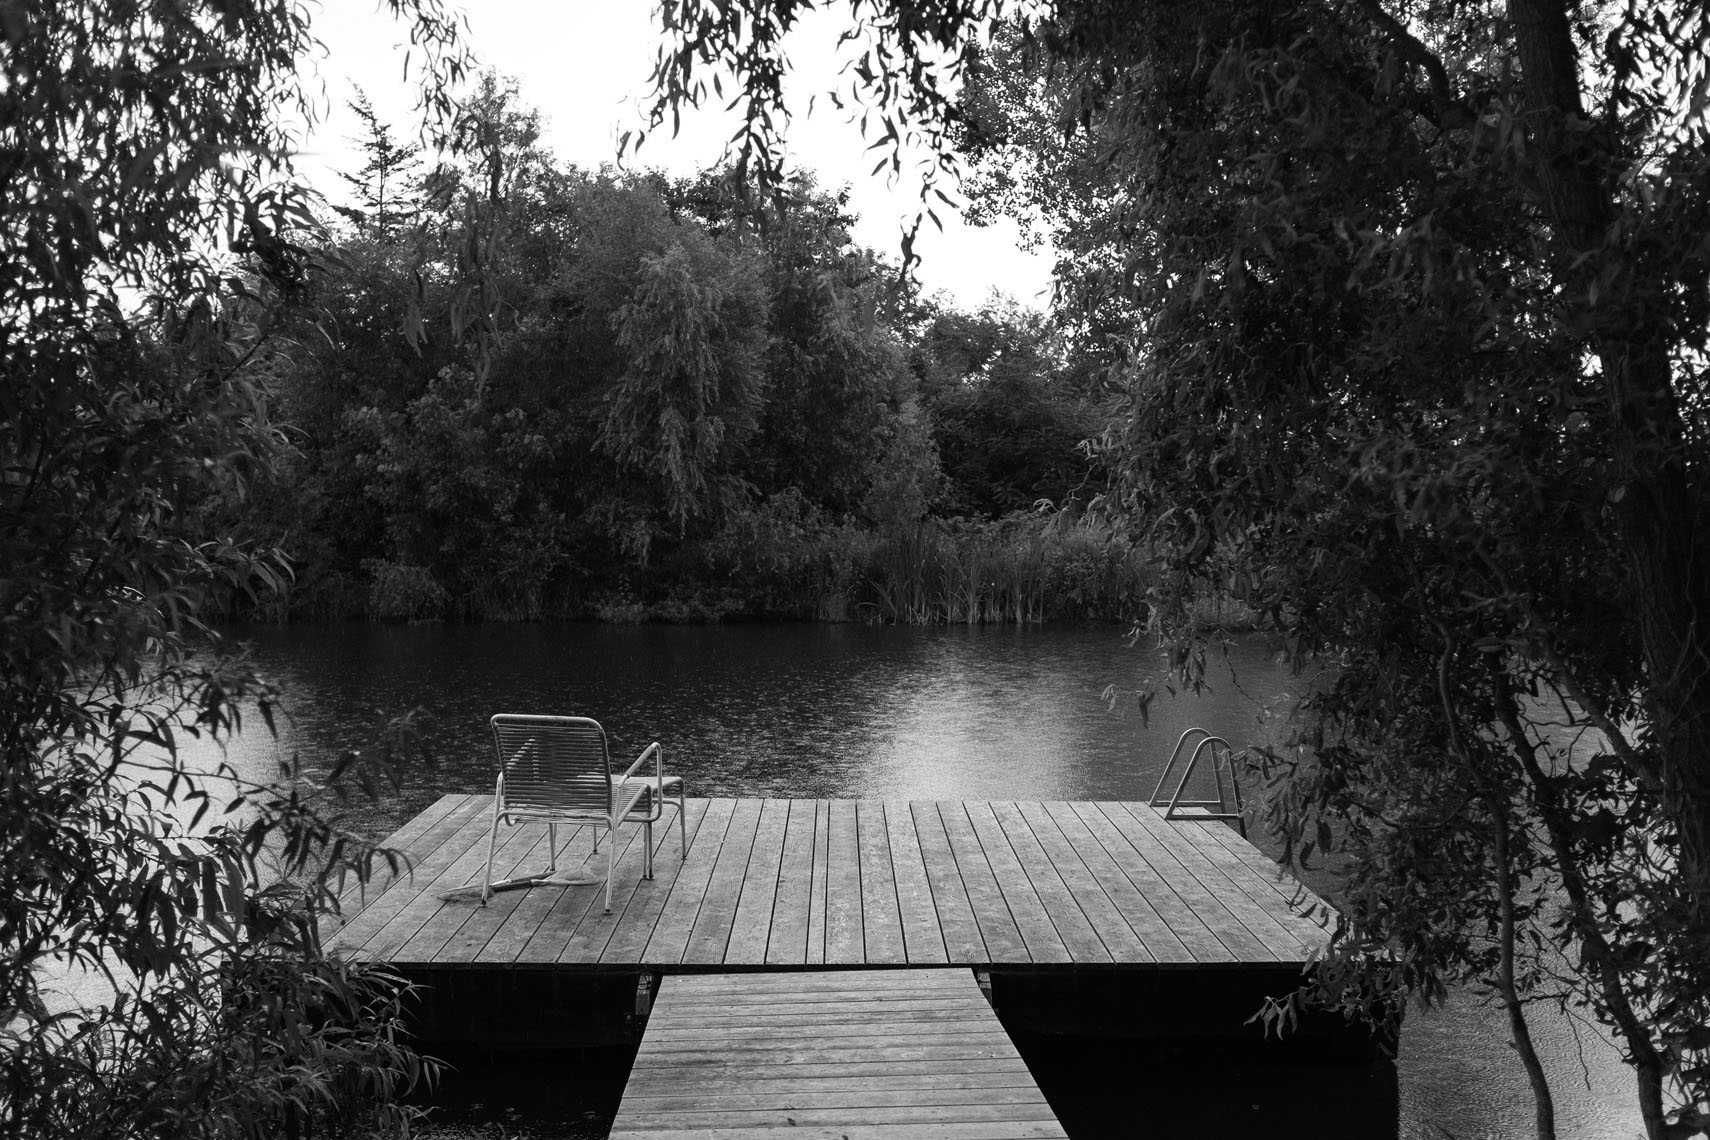 Pond and dock